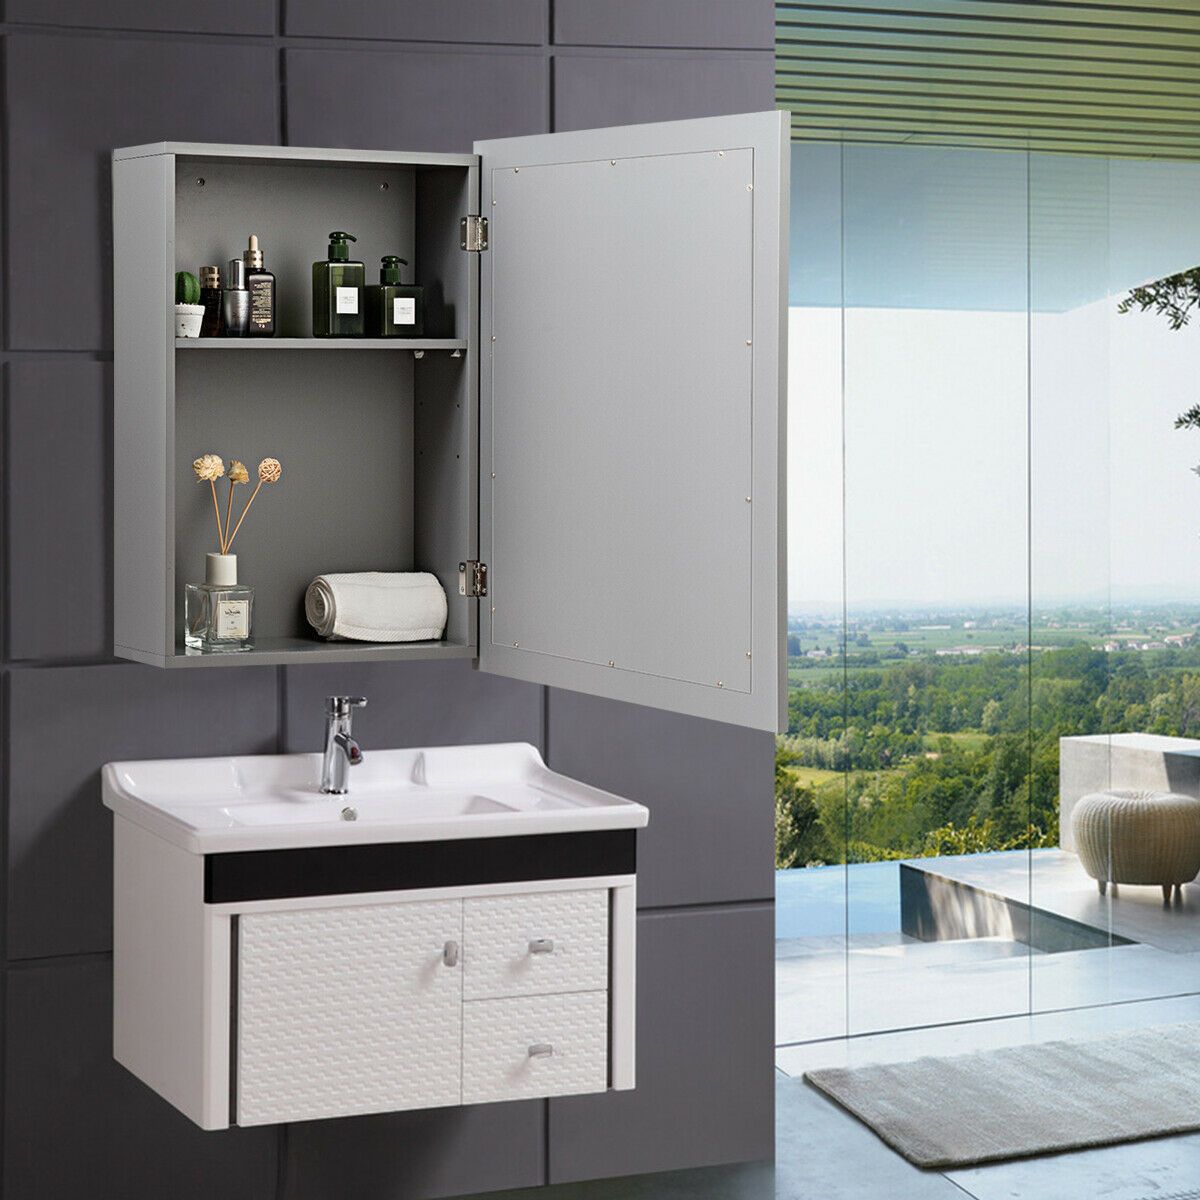 Adjustable Wall Mounted Storage Cupboard with Mirror for Bathroom